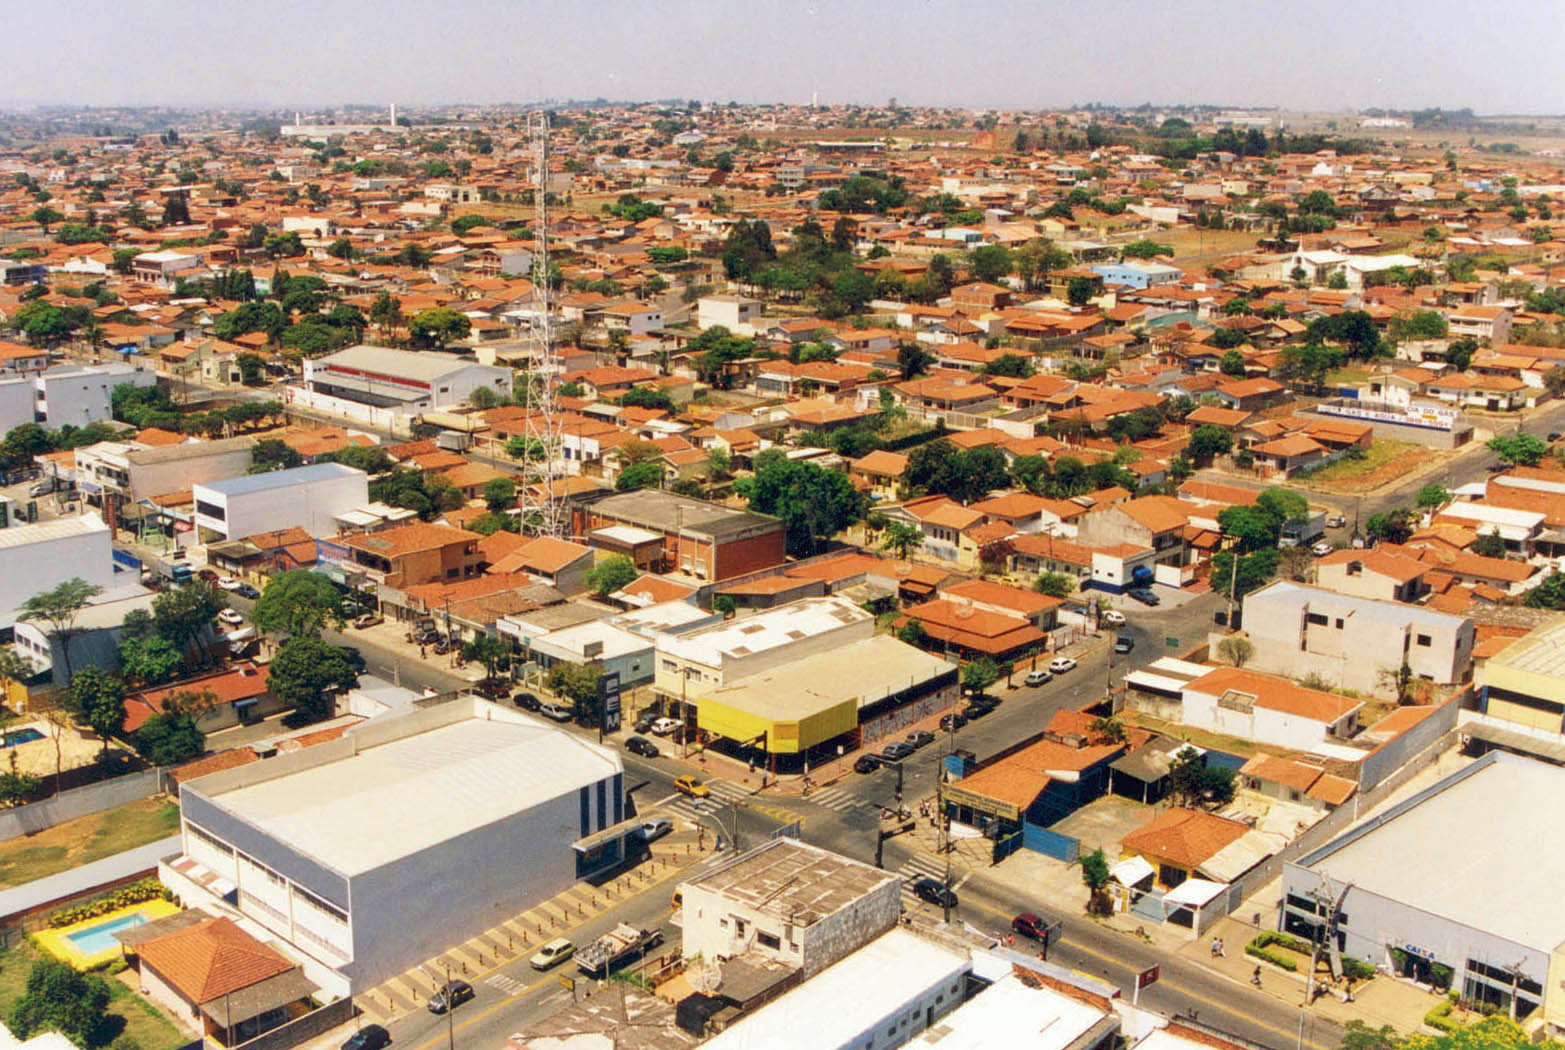 an aerial view of a neighborhood area of a small town